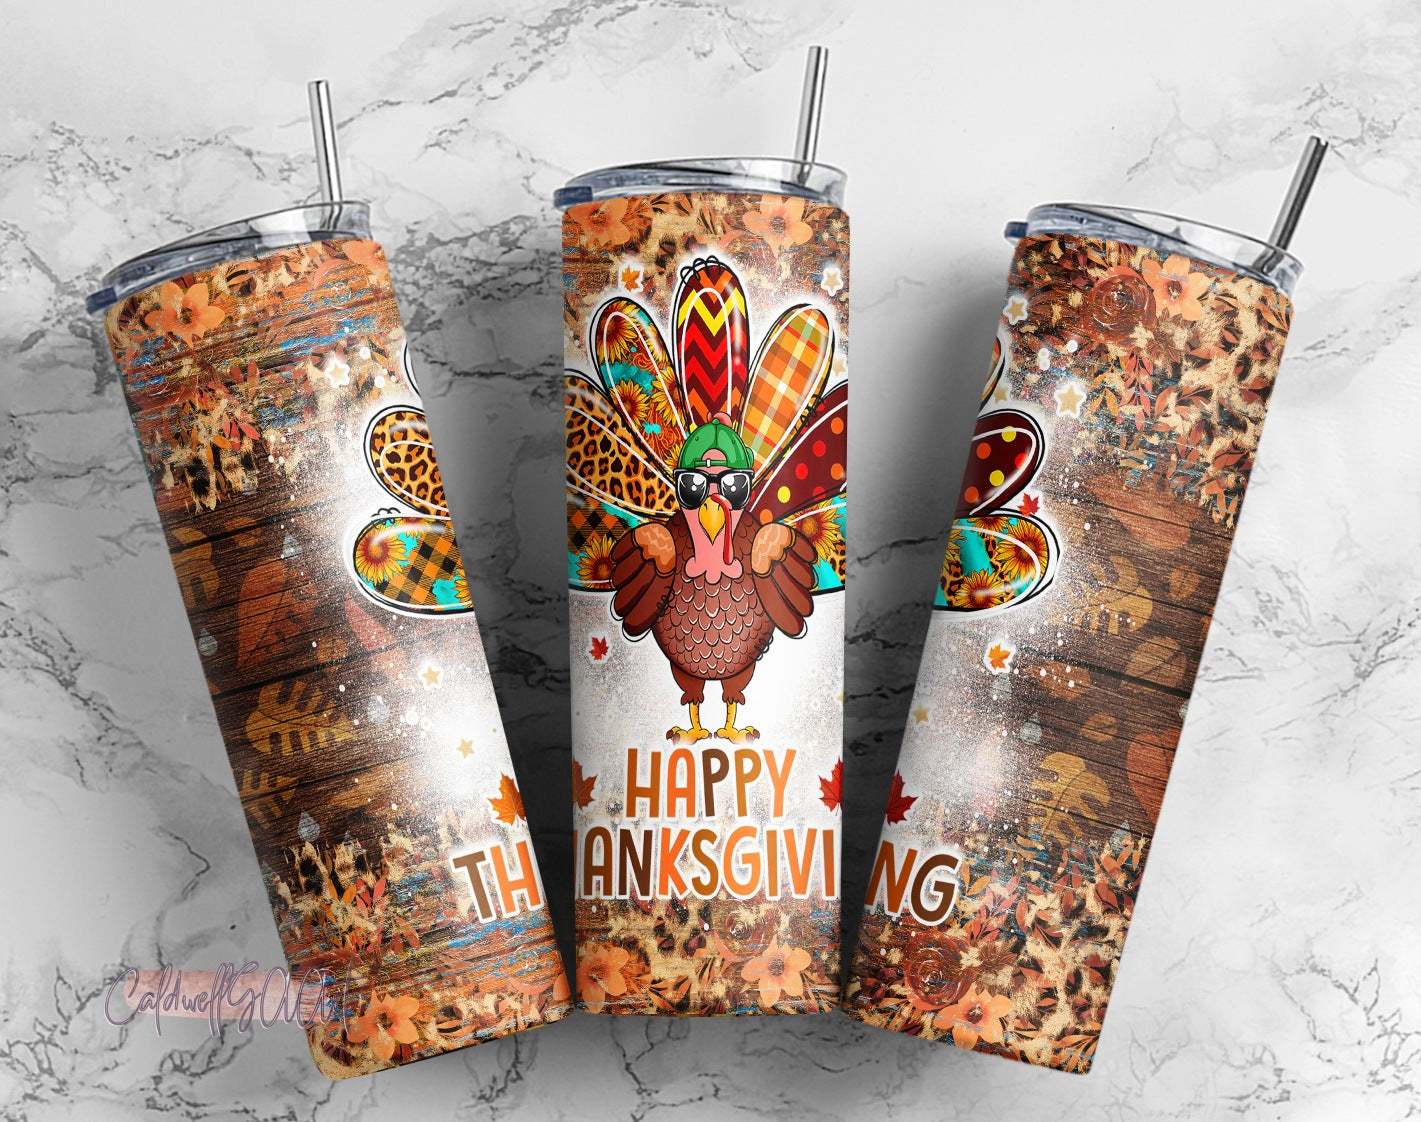 Fall Gnome Tumbler, Thanksgiving Tumbler, Pumpkin Drinking Cups With S –  Papelillo Art Design